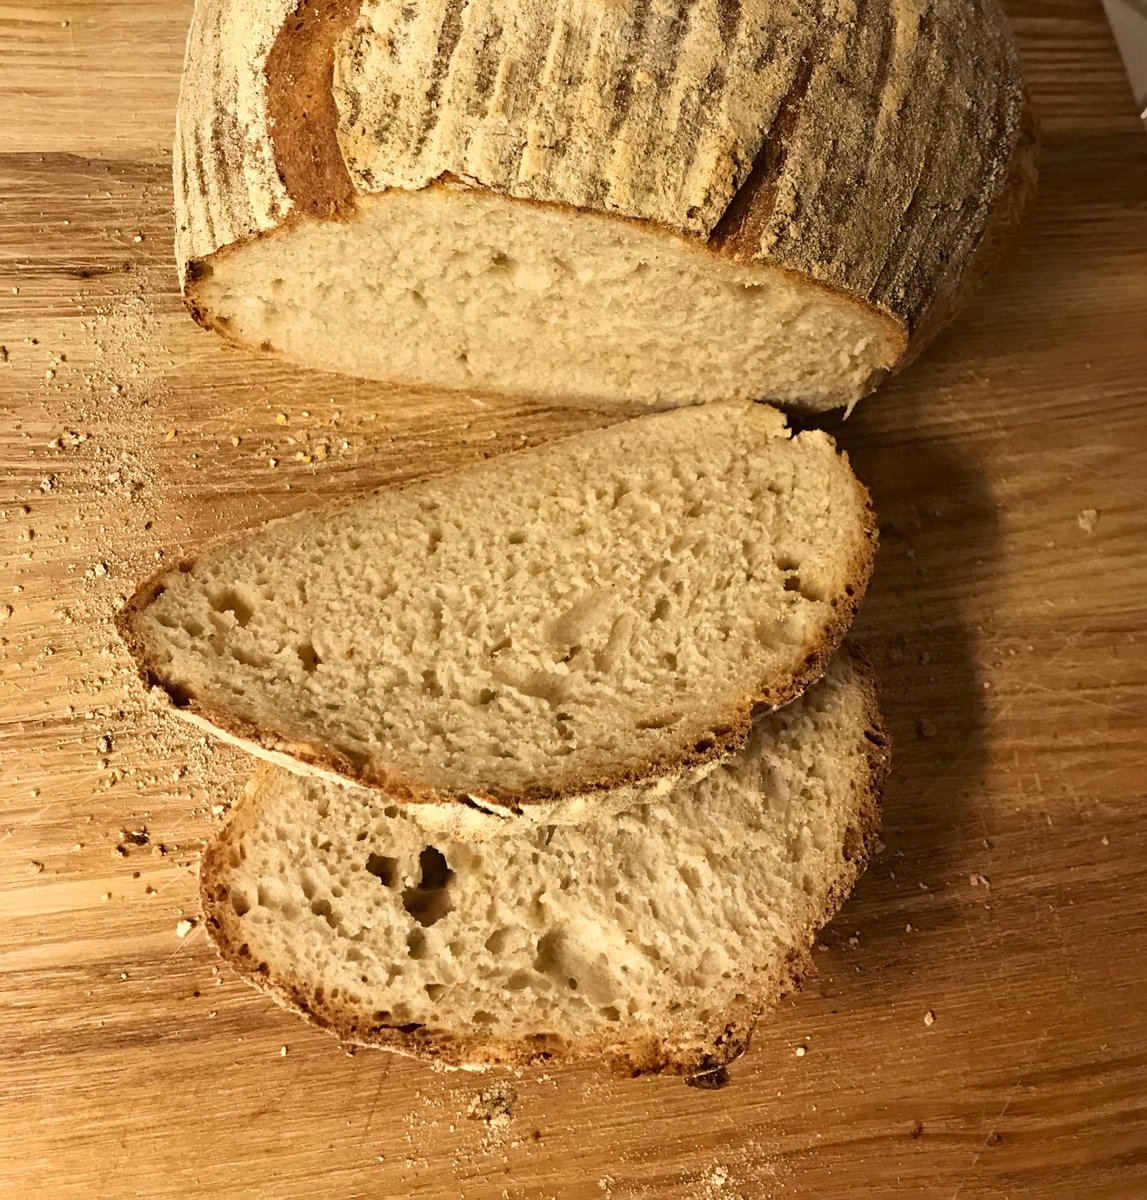 Here’s what the Roman loaf looks like inside.